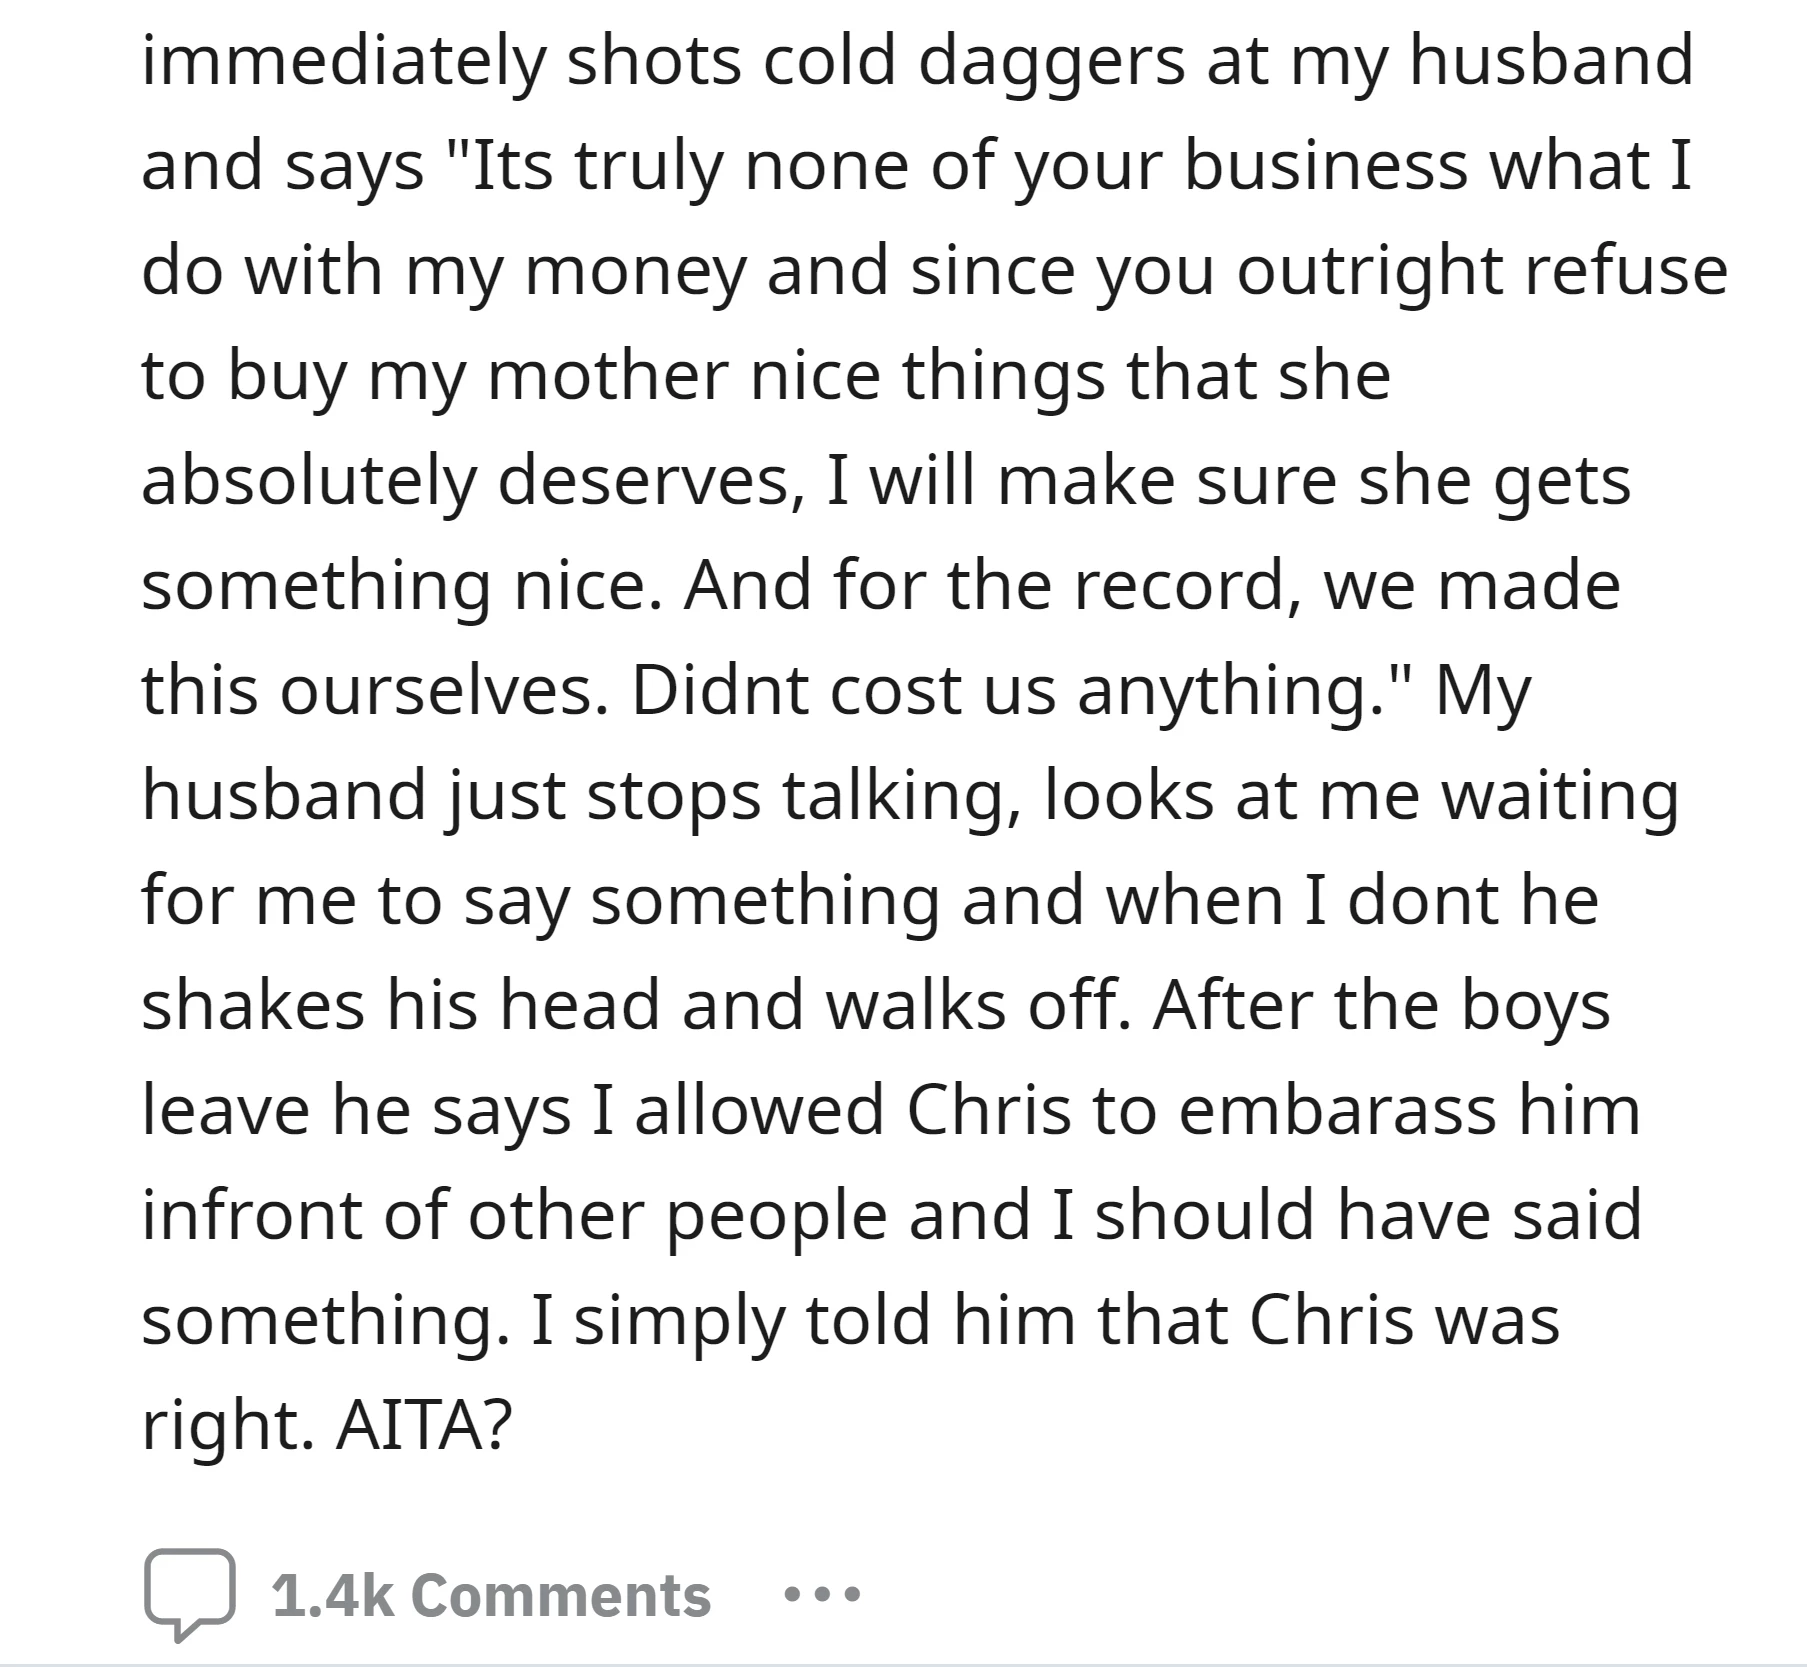 OP's son confronted his step dad for questioning the gift's cost